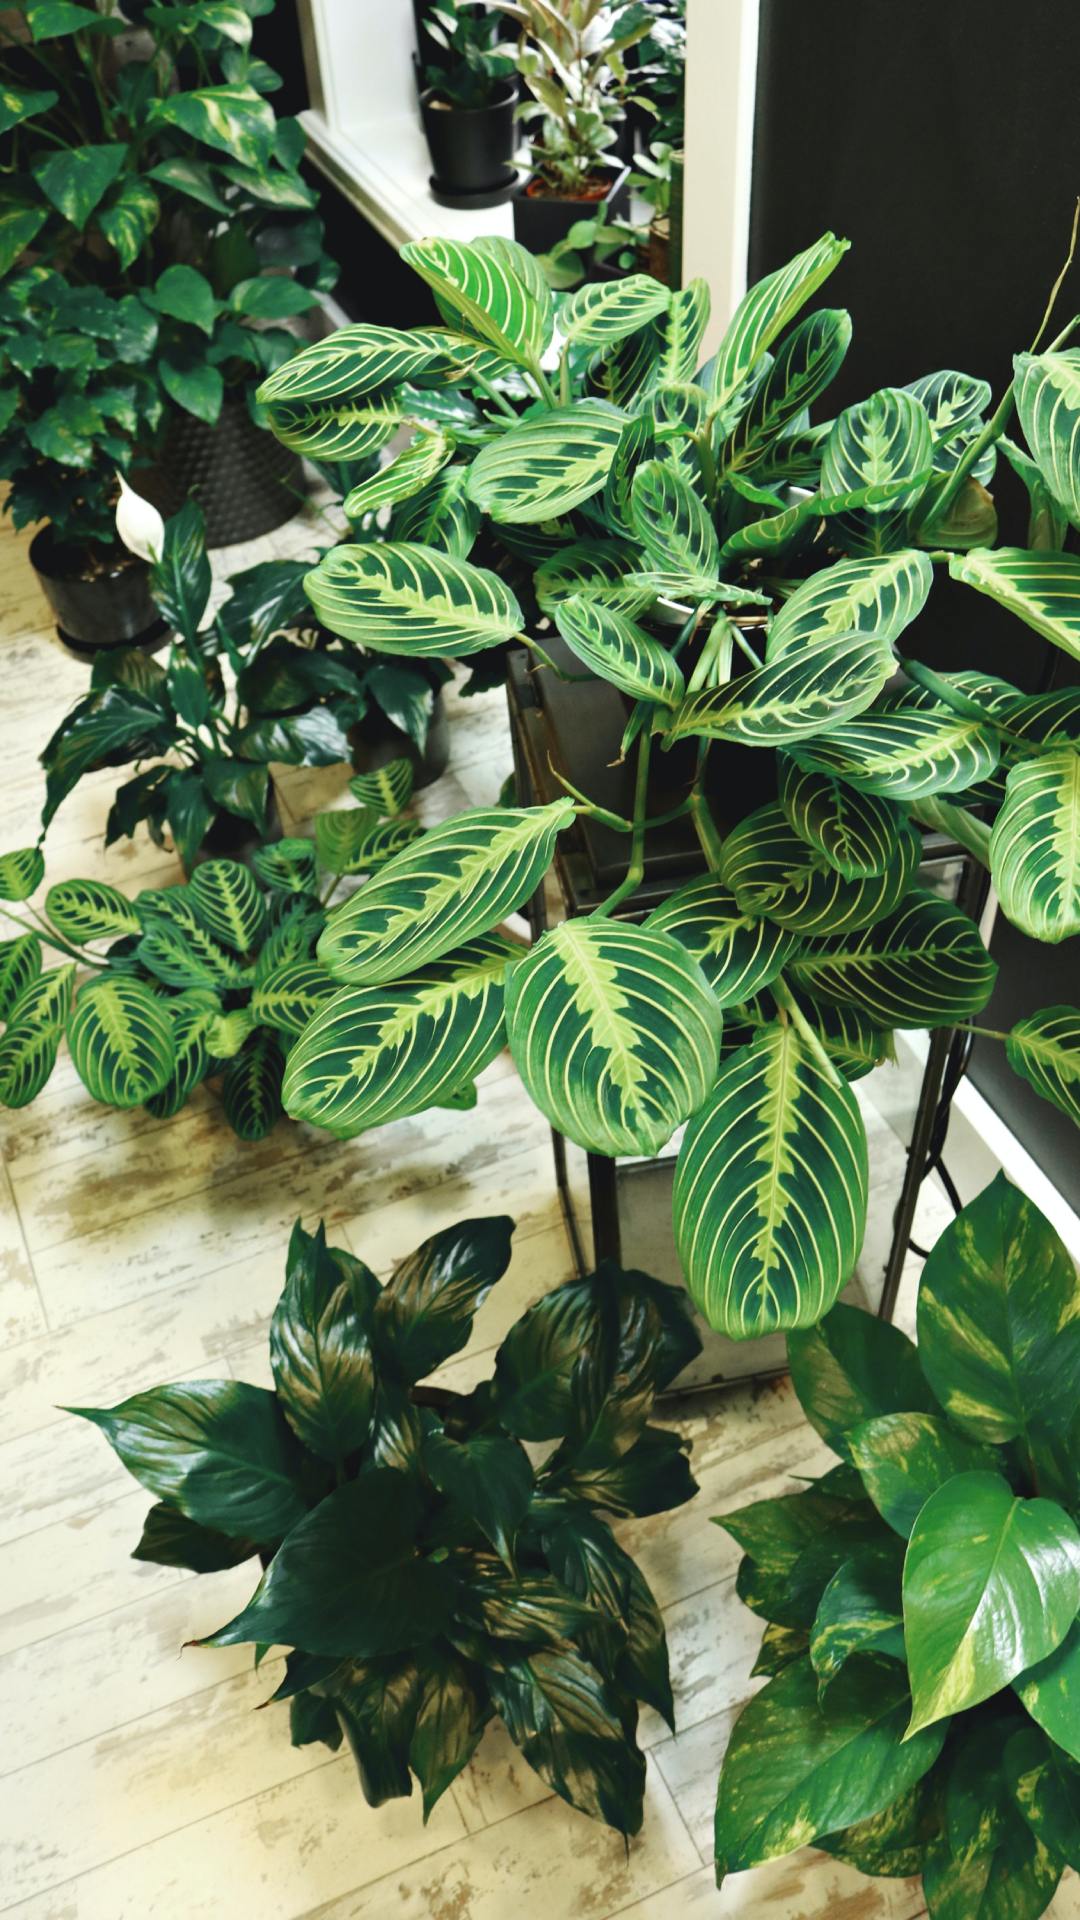 These plants must be planted to bring positive energy in the house